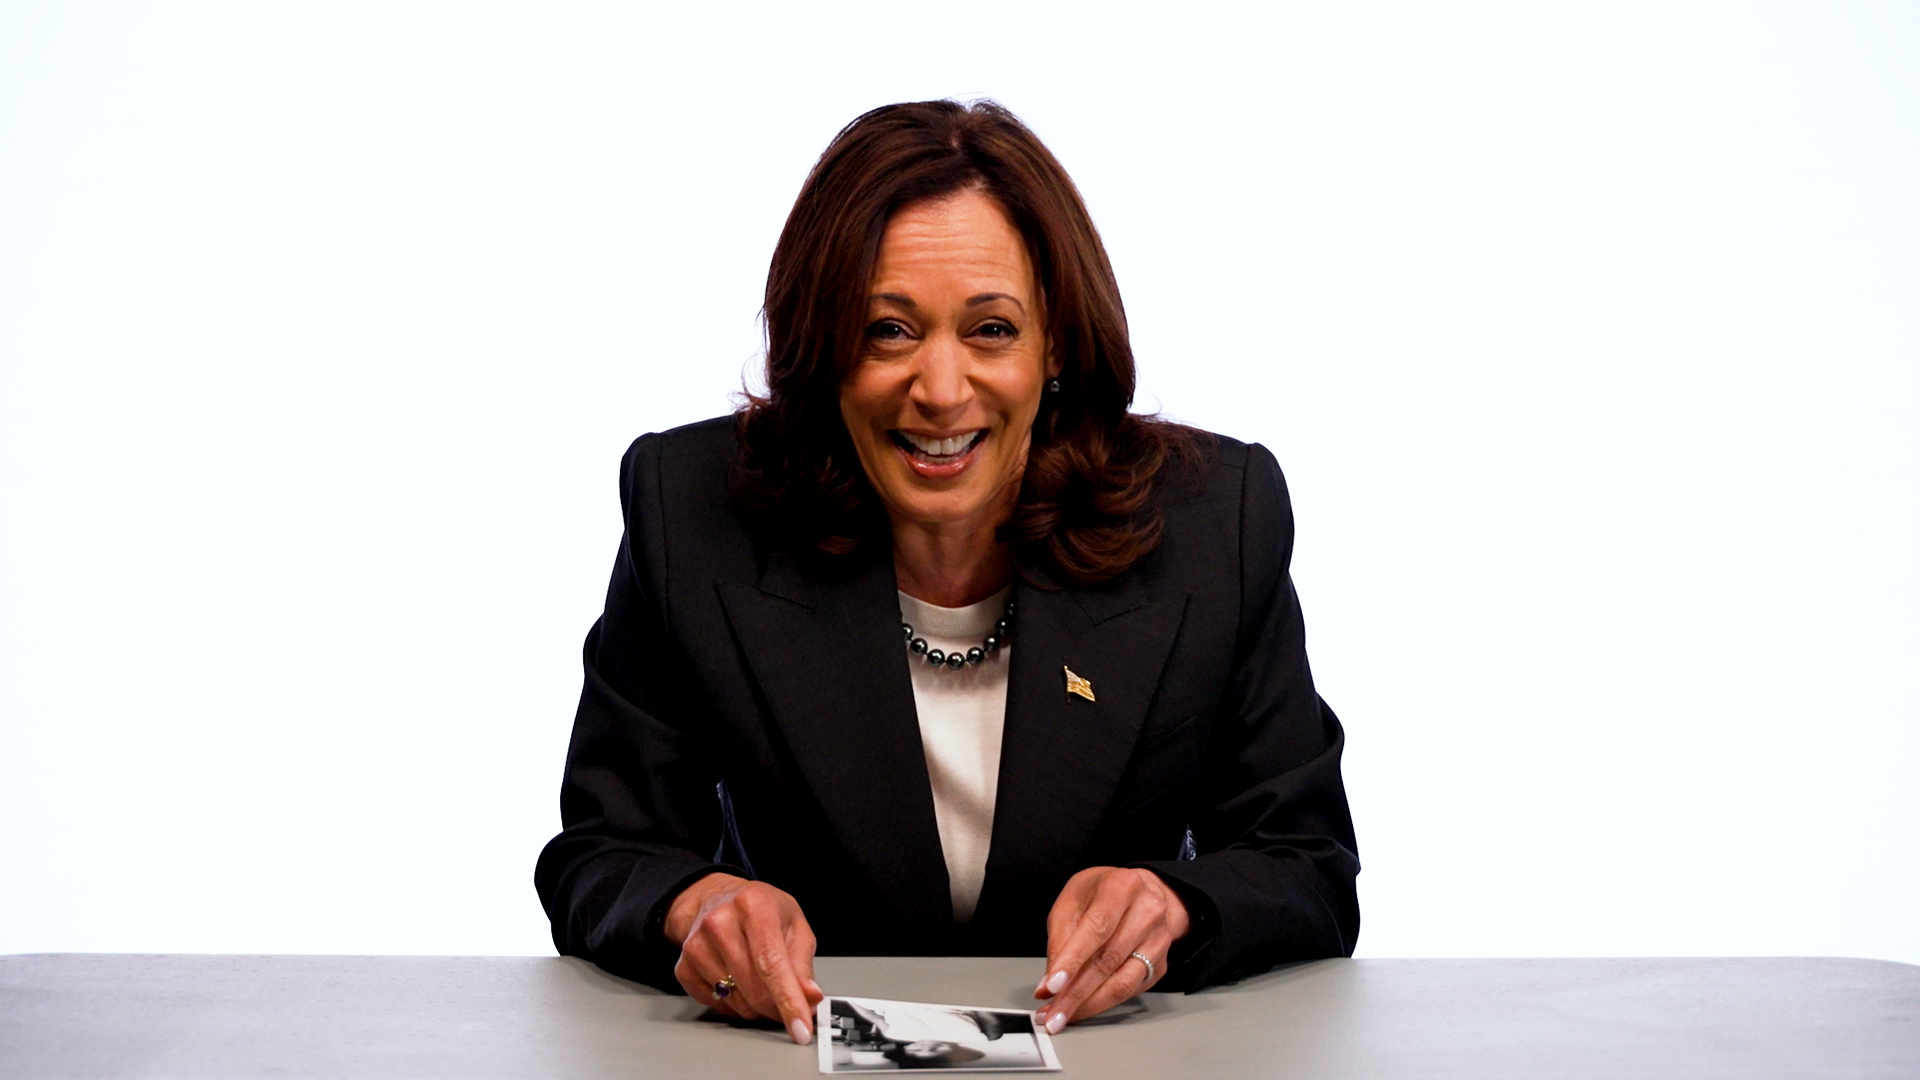 Kamala Harris sits at a table, smiling, looking at a photograph in her hands